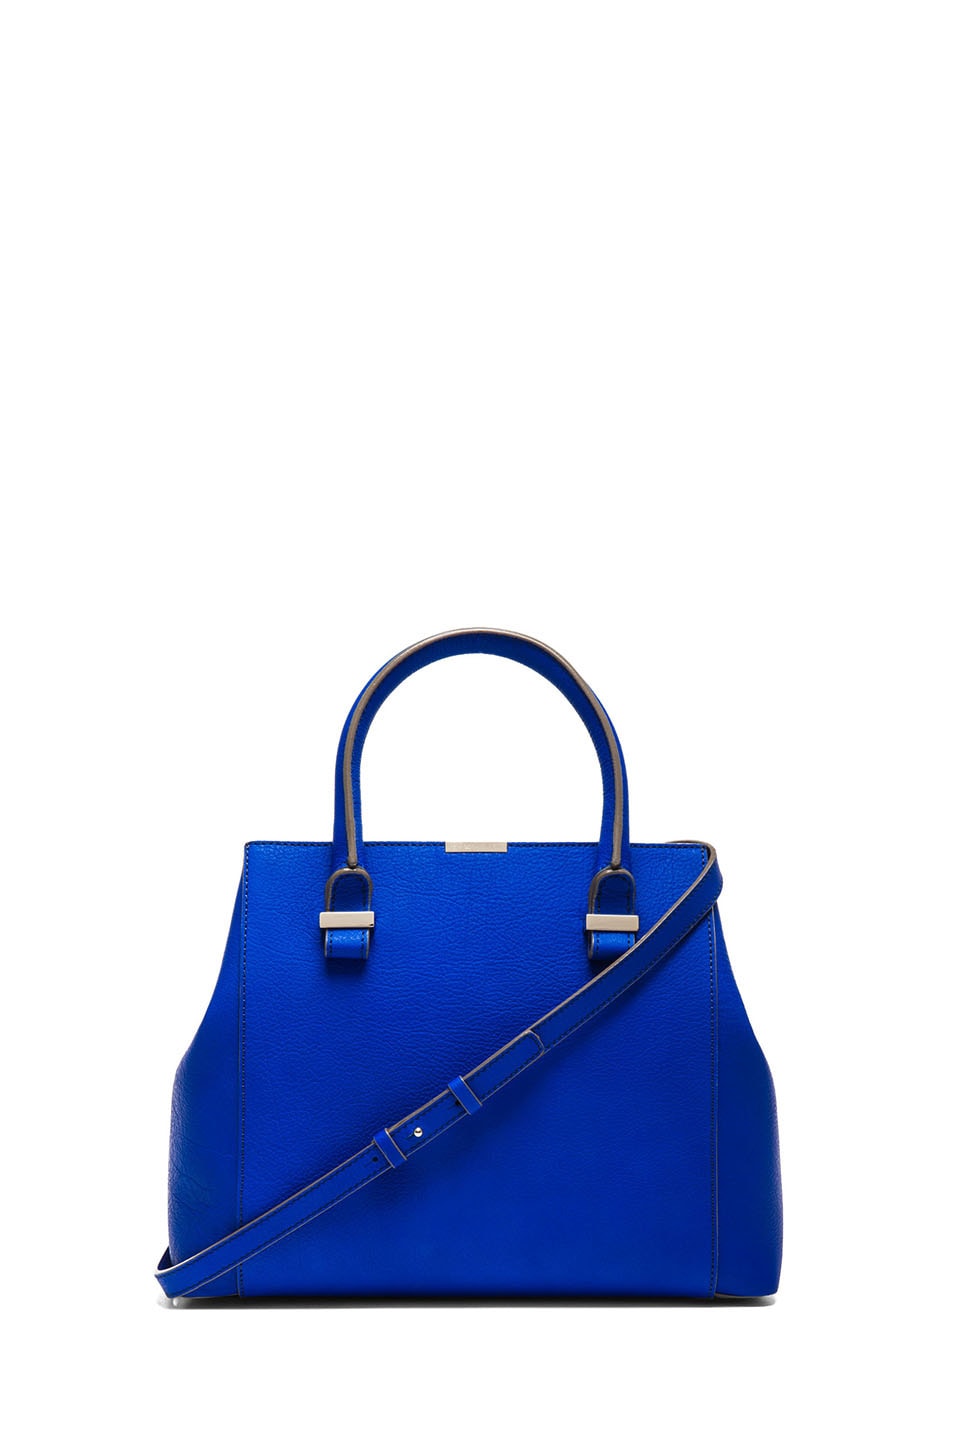 Image 1 of Victoria Beckham Quincy Tote in Bright Blue